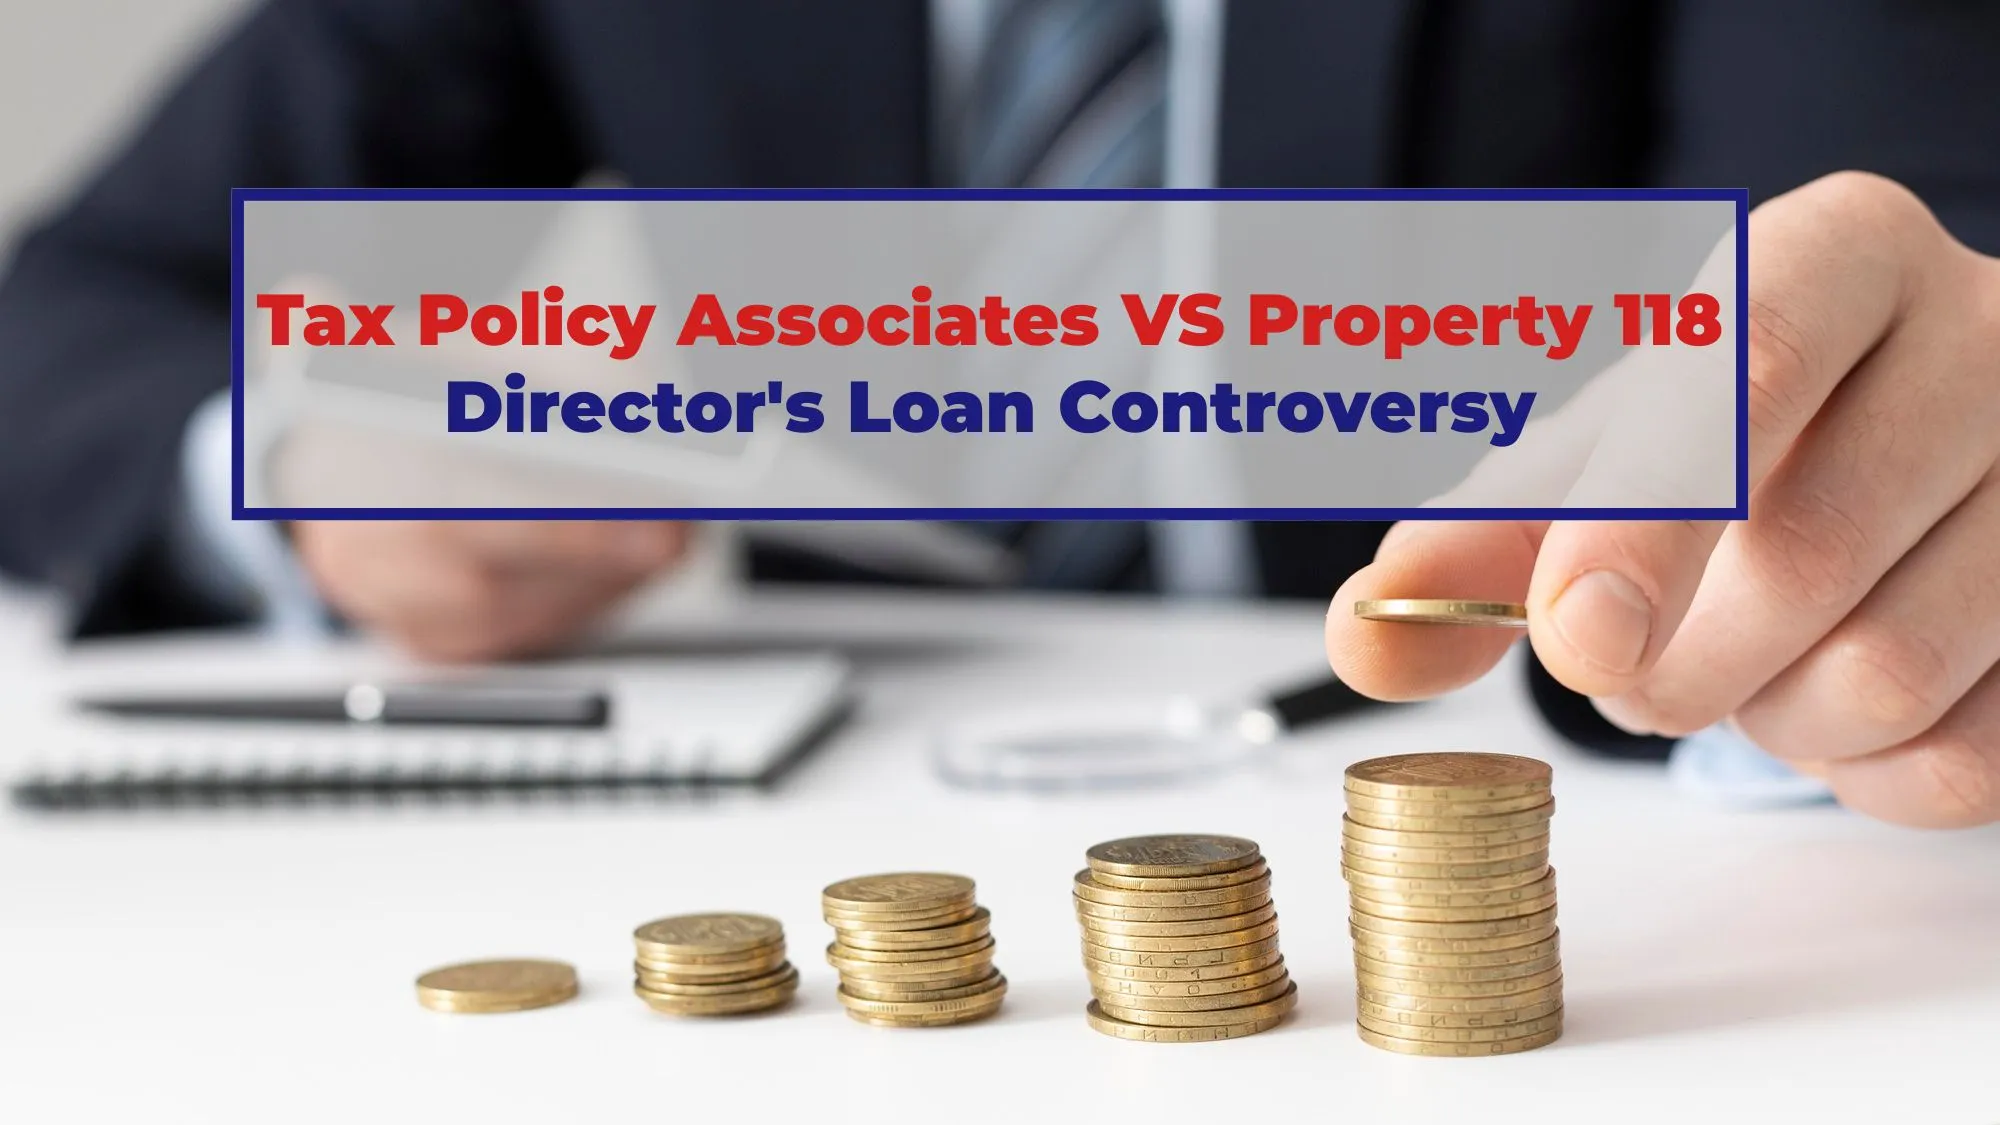 Tax Policy Associates vs Property 118 Director's Loan Controversy